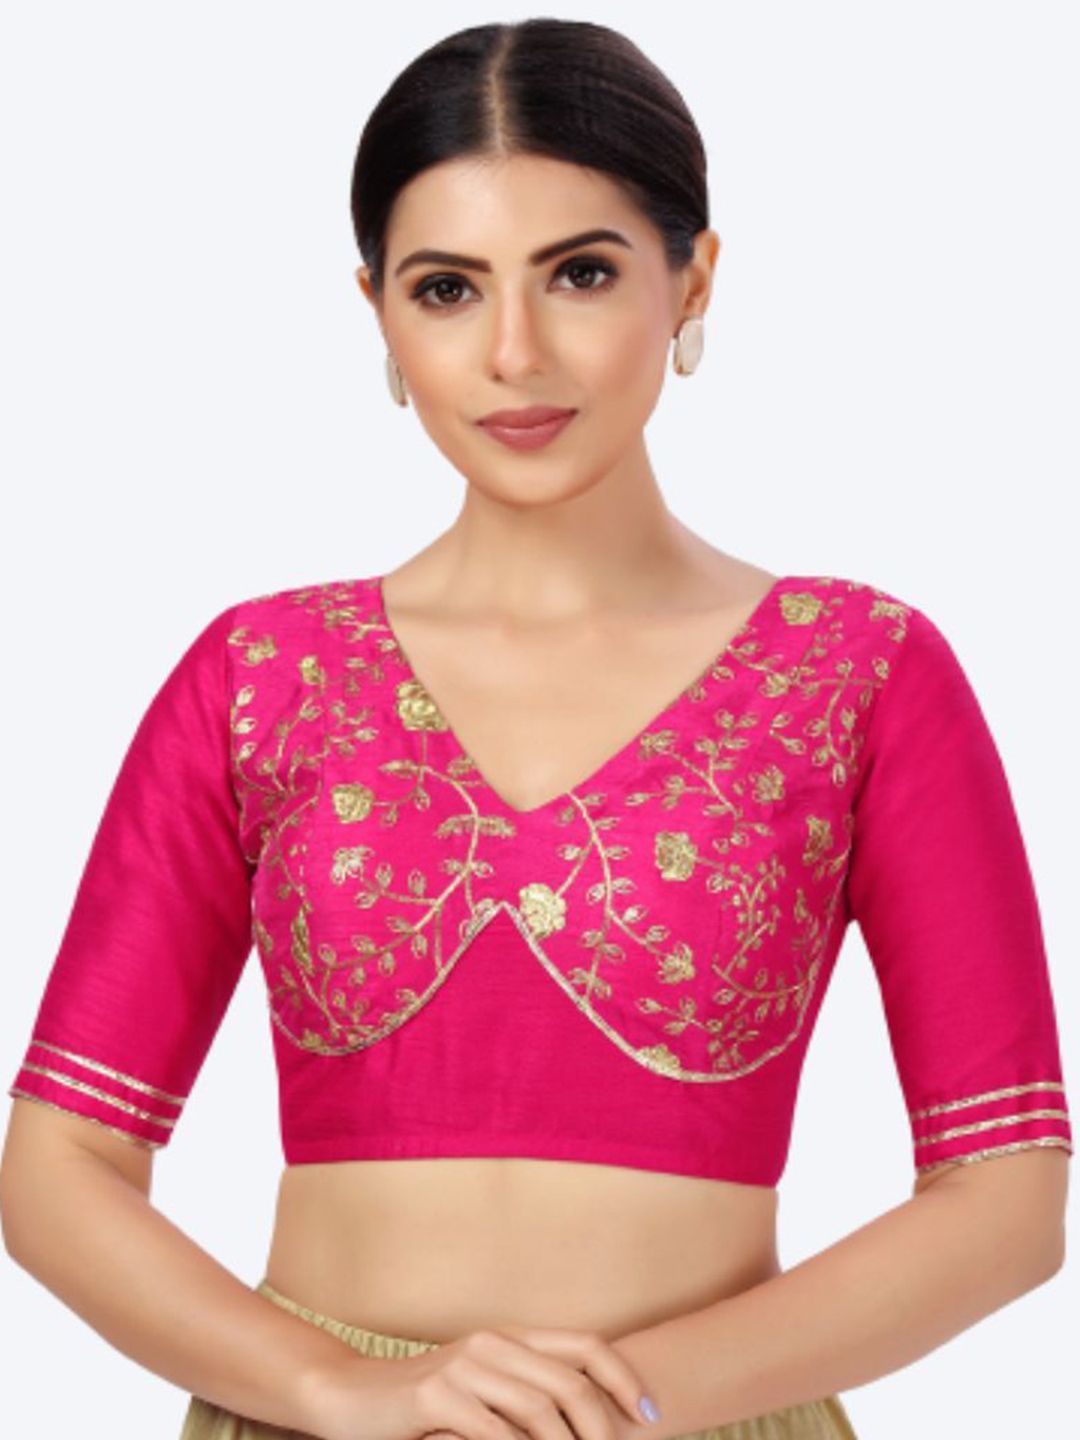 Studio Shringaar Pink & Gold-Toned Embroidered Saree Blouse Price in India